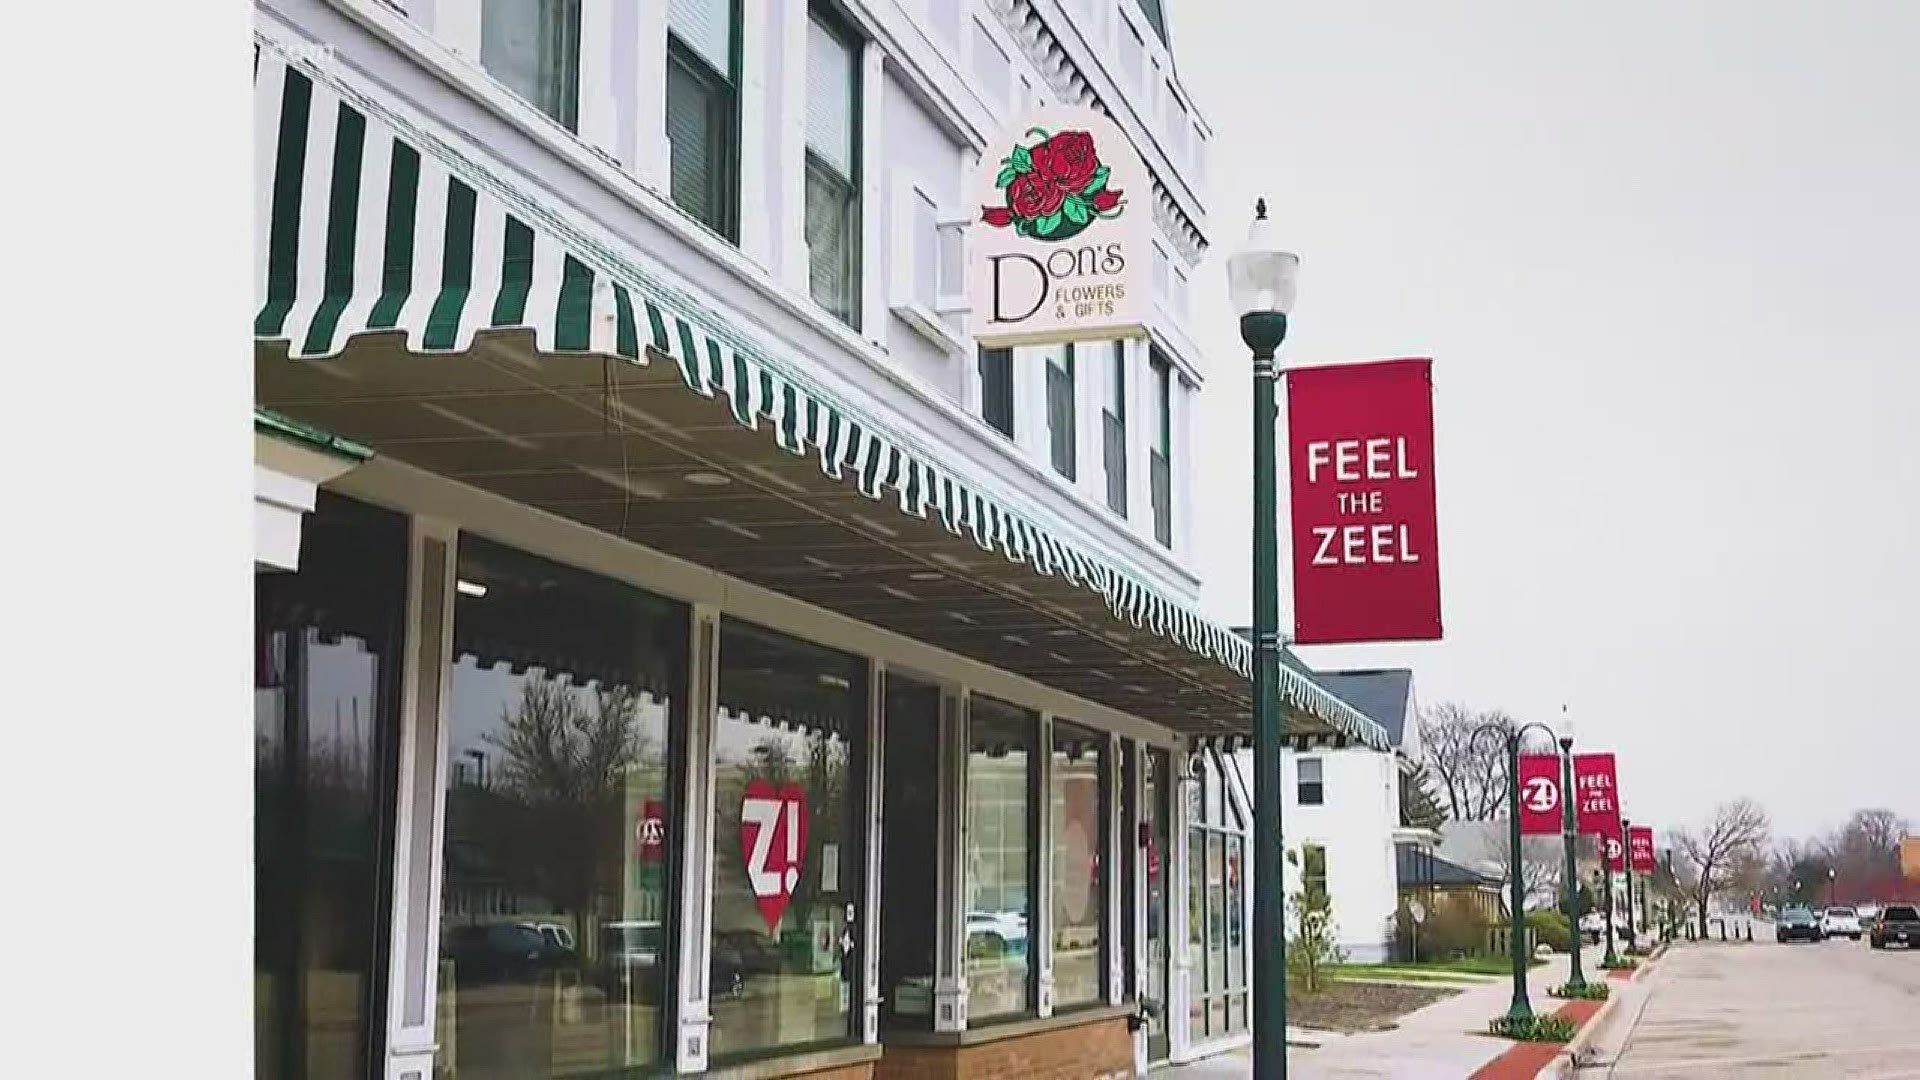 The City of Zeeland is temporarily changing its motto. Feel the Zeel a phase used to promote the city  is stepping aside for Heal the Zeel.